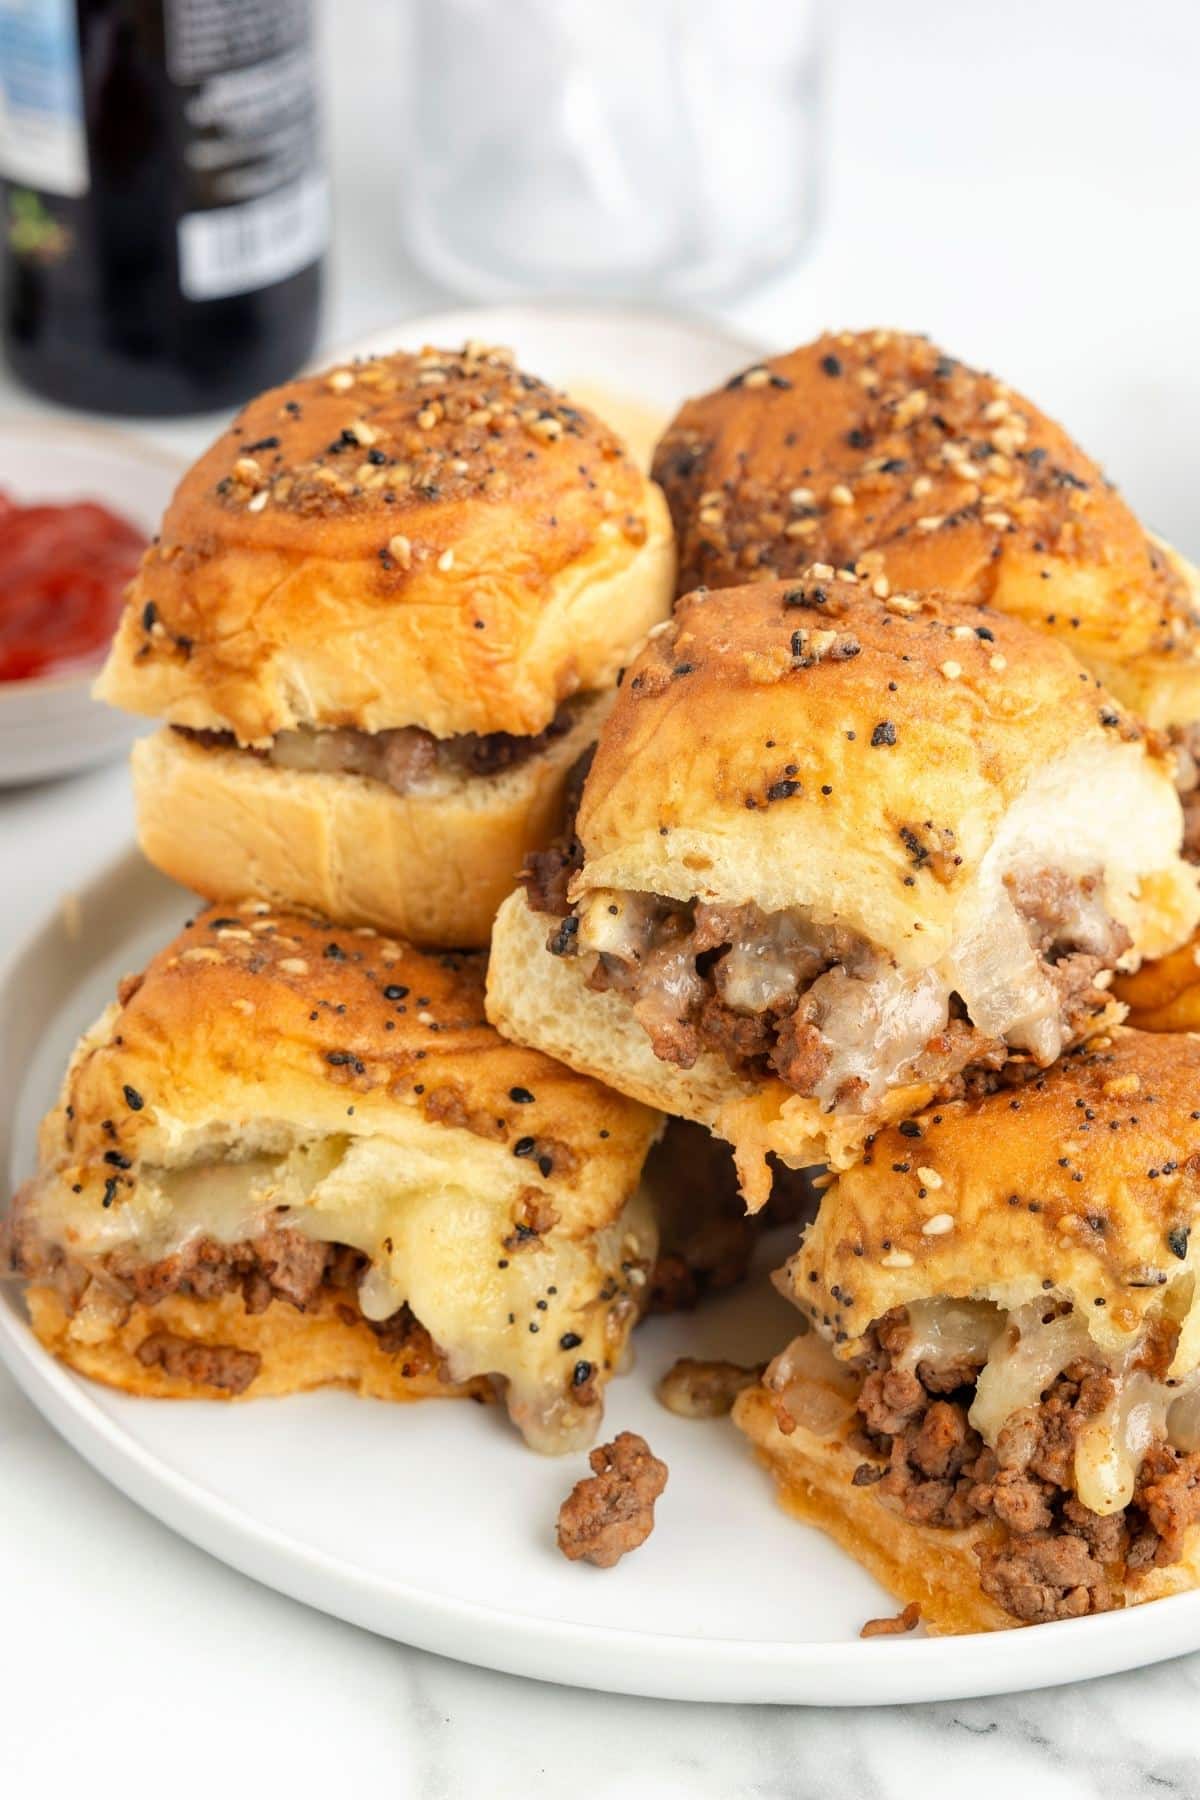 Cheeseburger Sliders stacked on plate with gooey cheese.